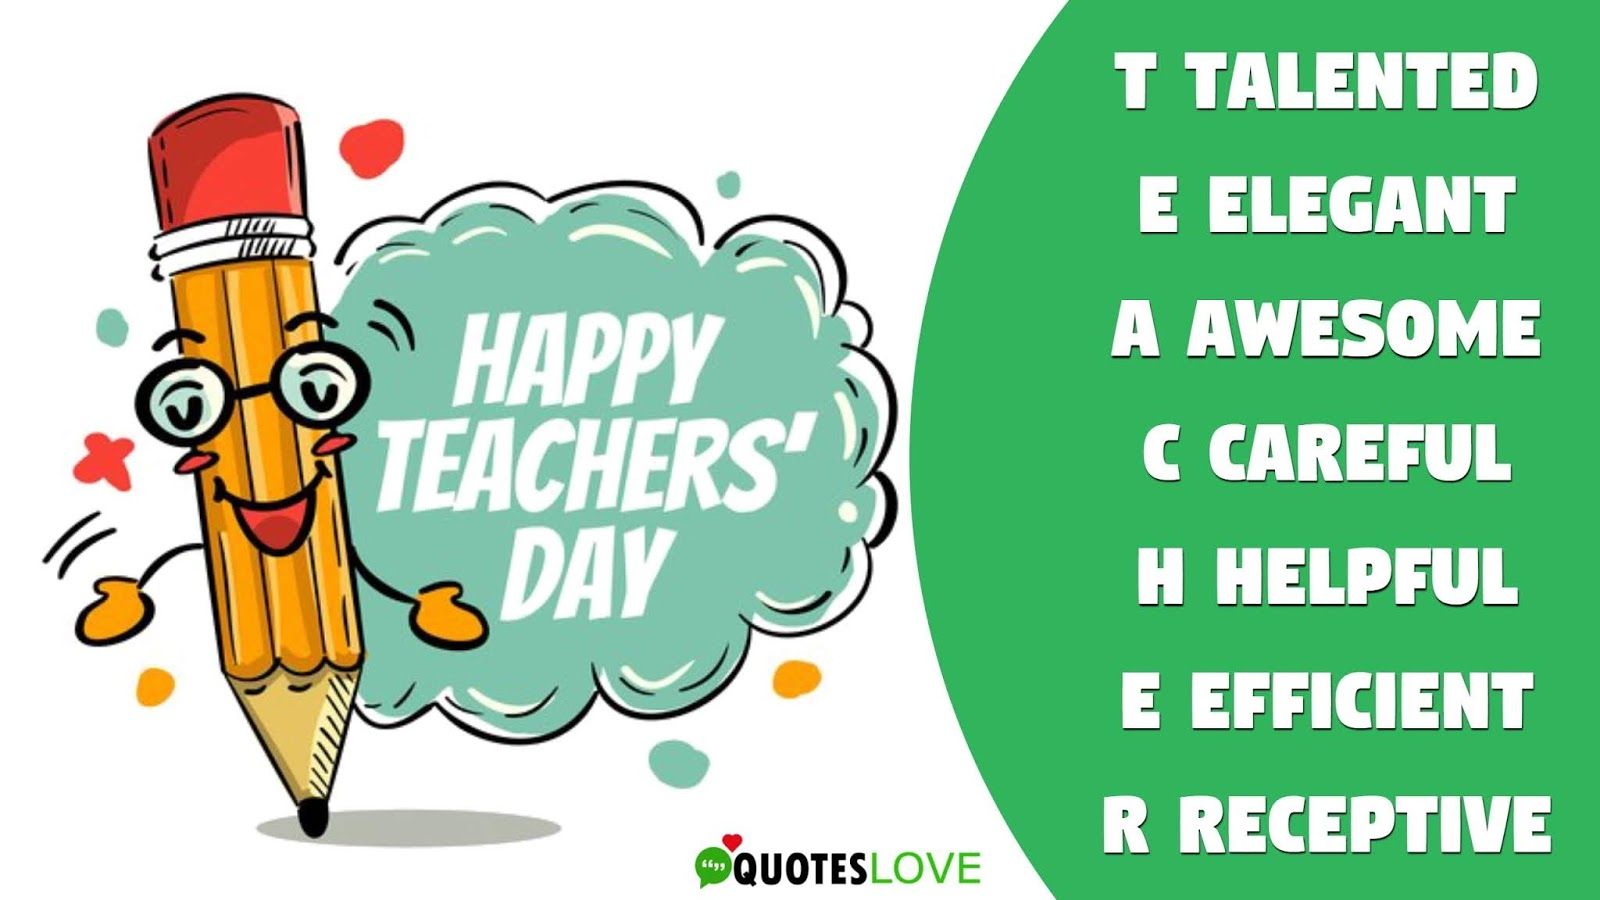 (New) Happy Teachers Day 2021: Quotes, Status, Wishes, Image and Messages